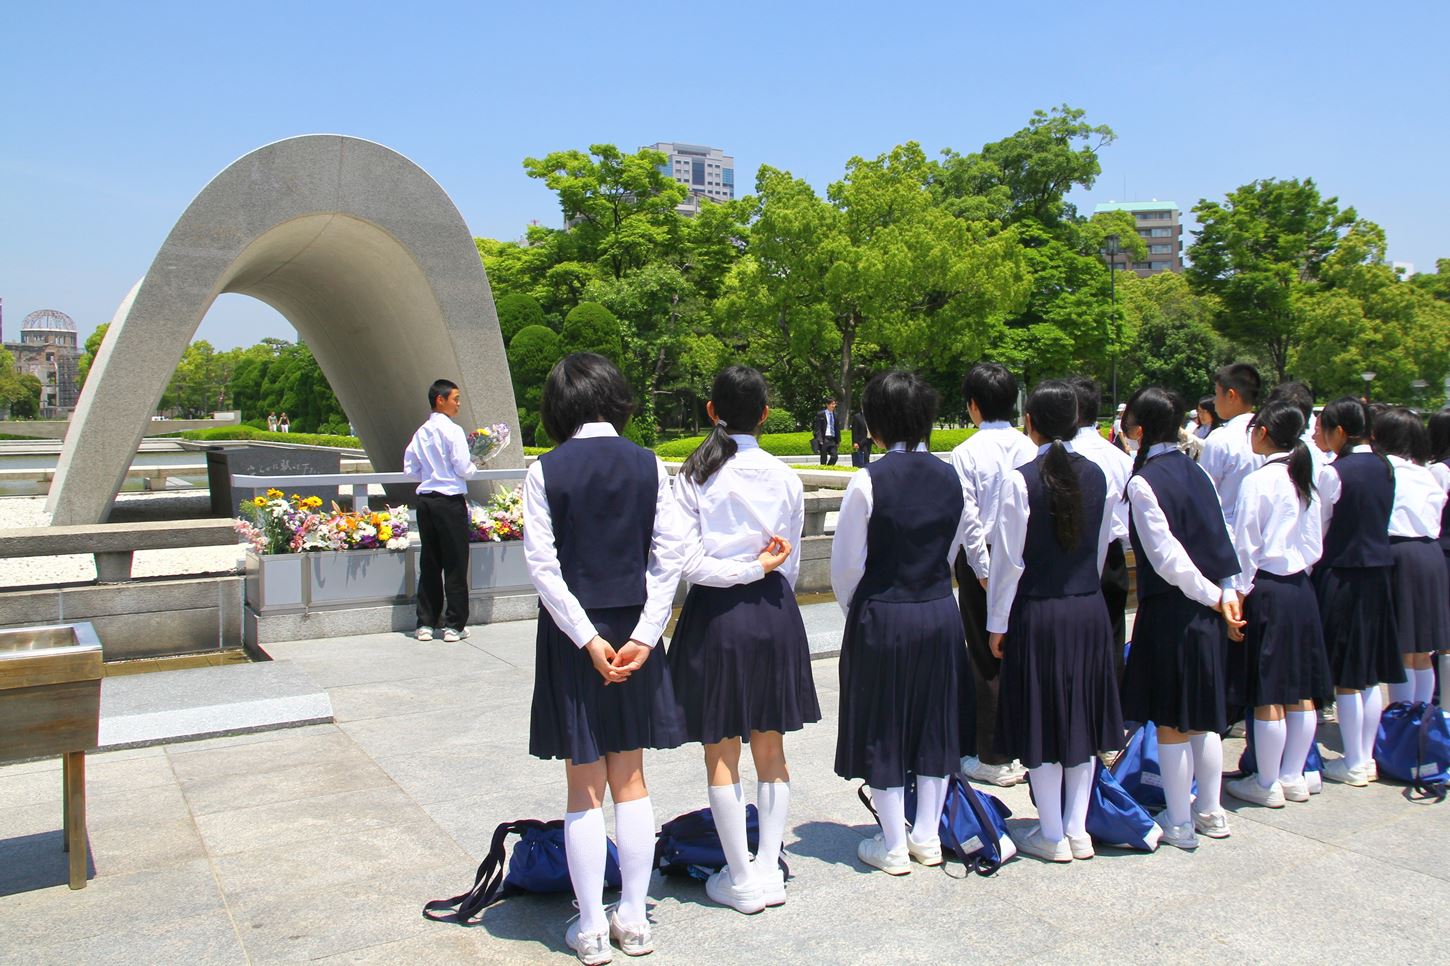 Sightseeing scenery that simply shows the weather in Hiroshima in May3